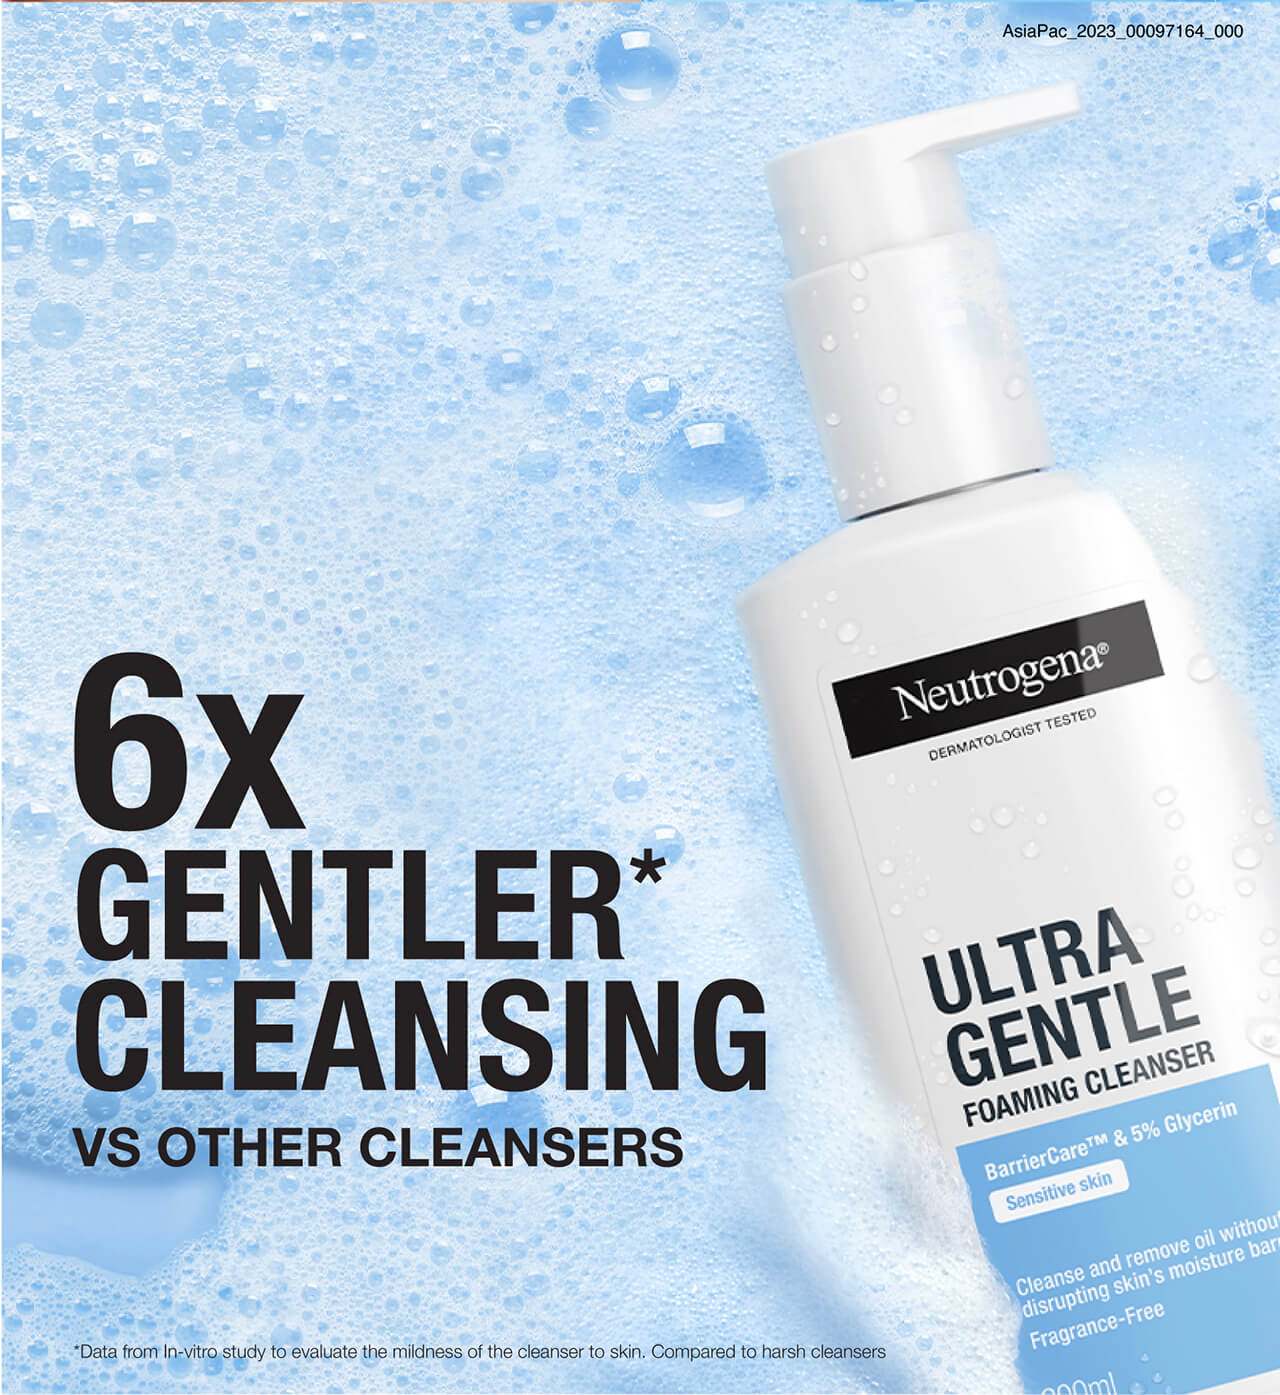 6x  GENTLER*  CLEANSING VS OTHER CLEANSERS